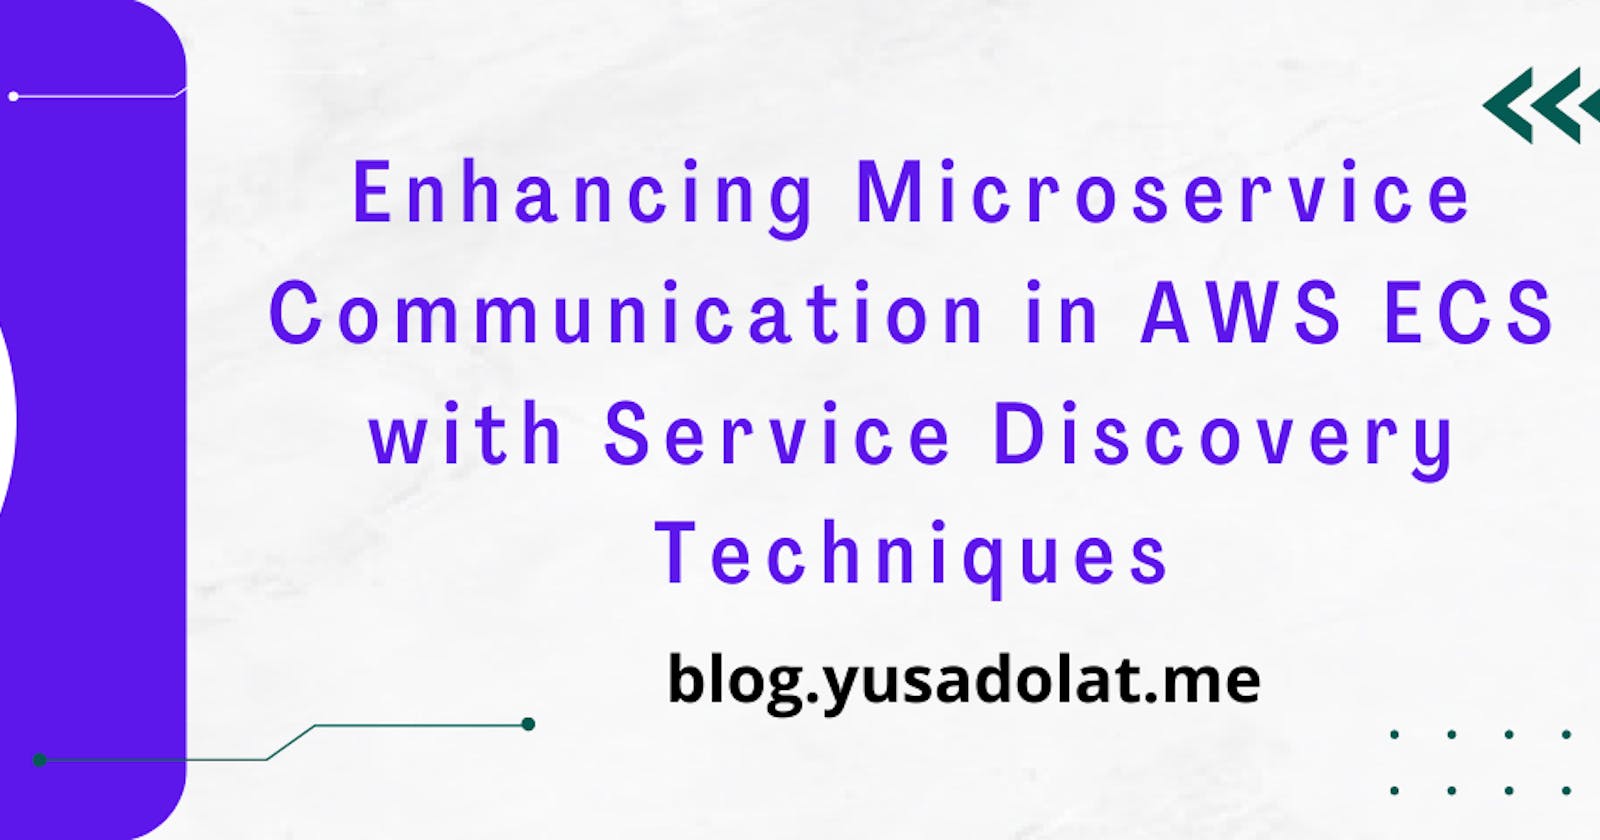 Enhancing Microservice Communication in AWS ECS with Service Discovery Techniques